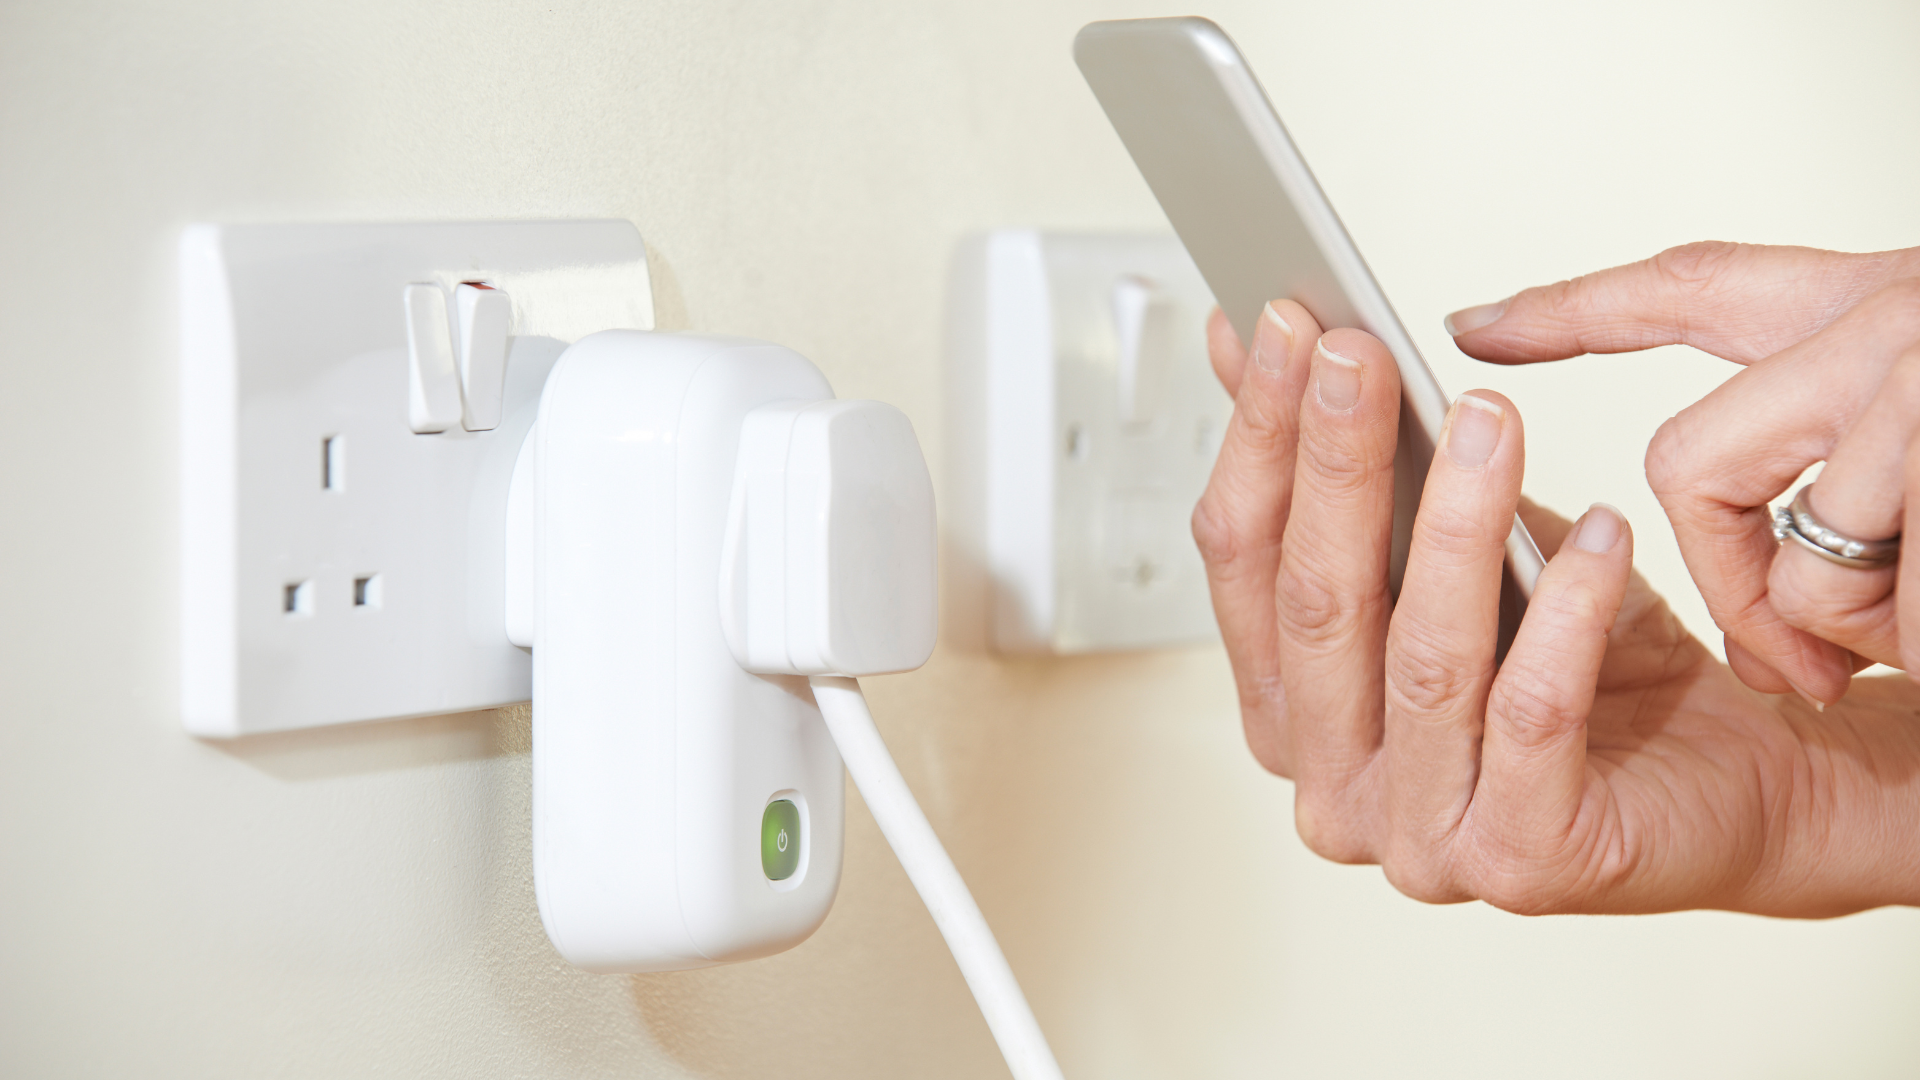 Best smart plugs add control to any outlet | T3